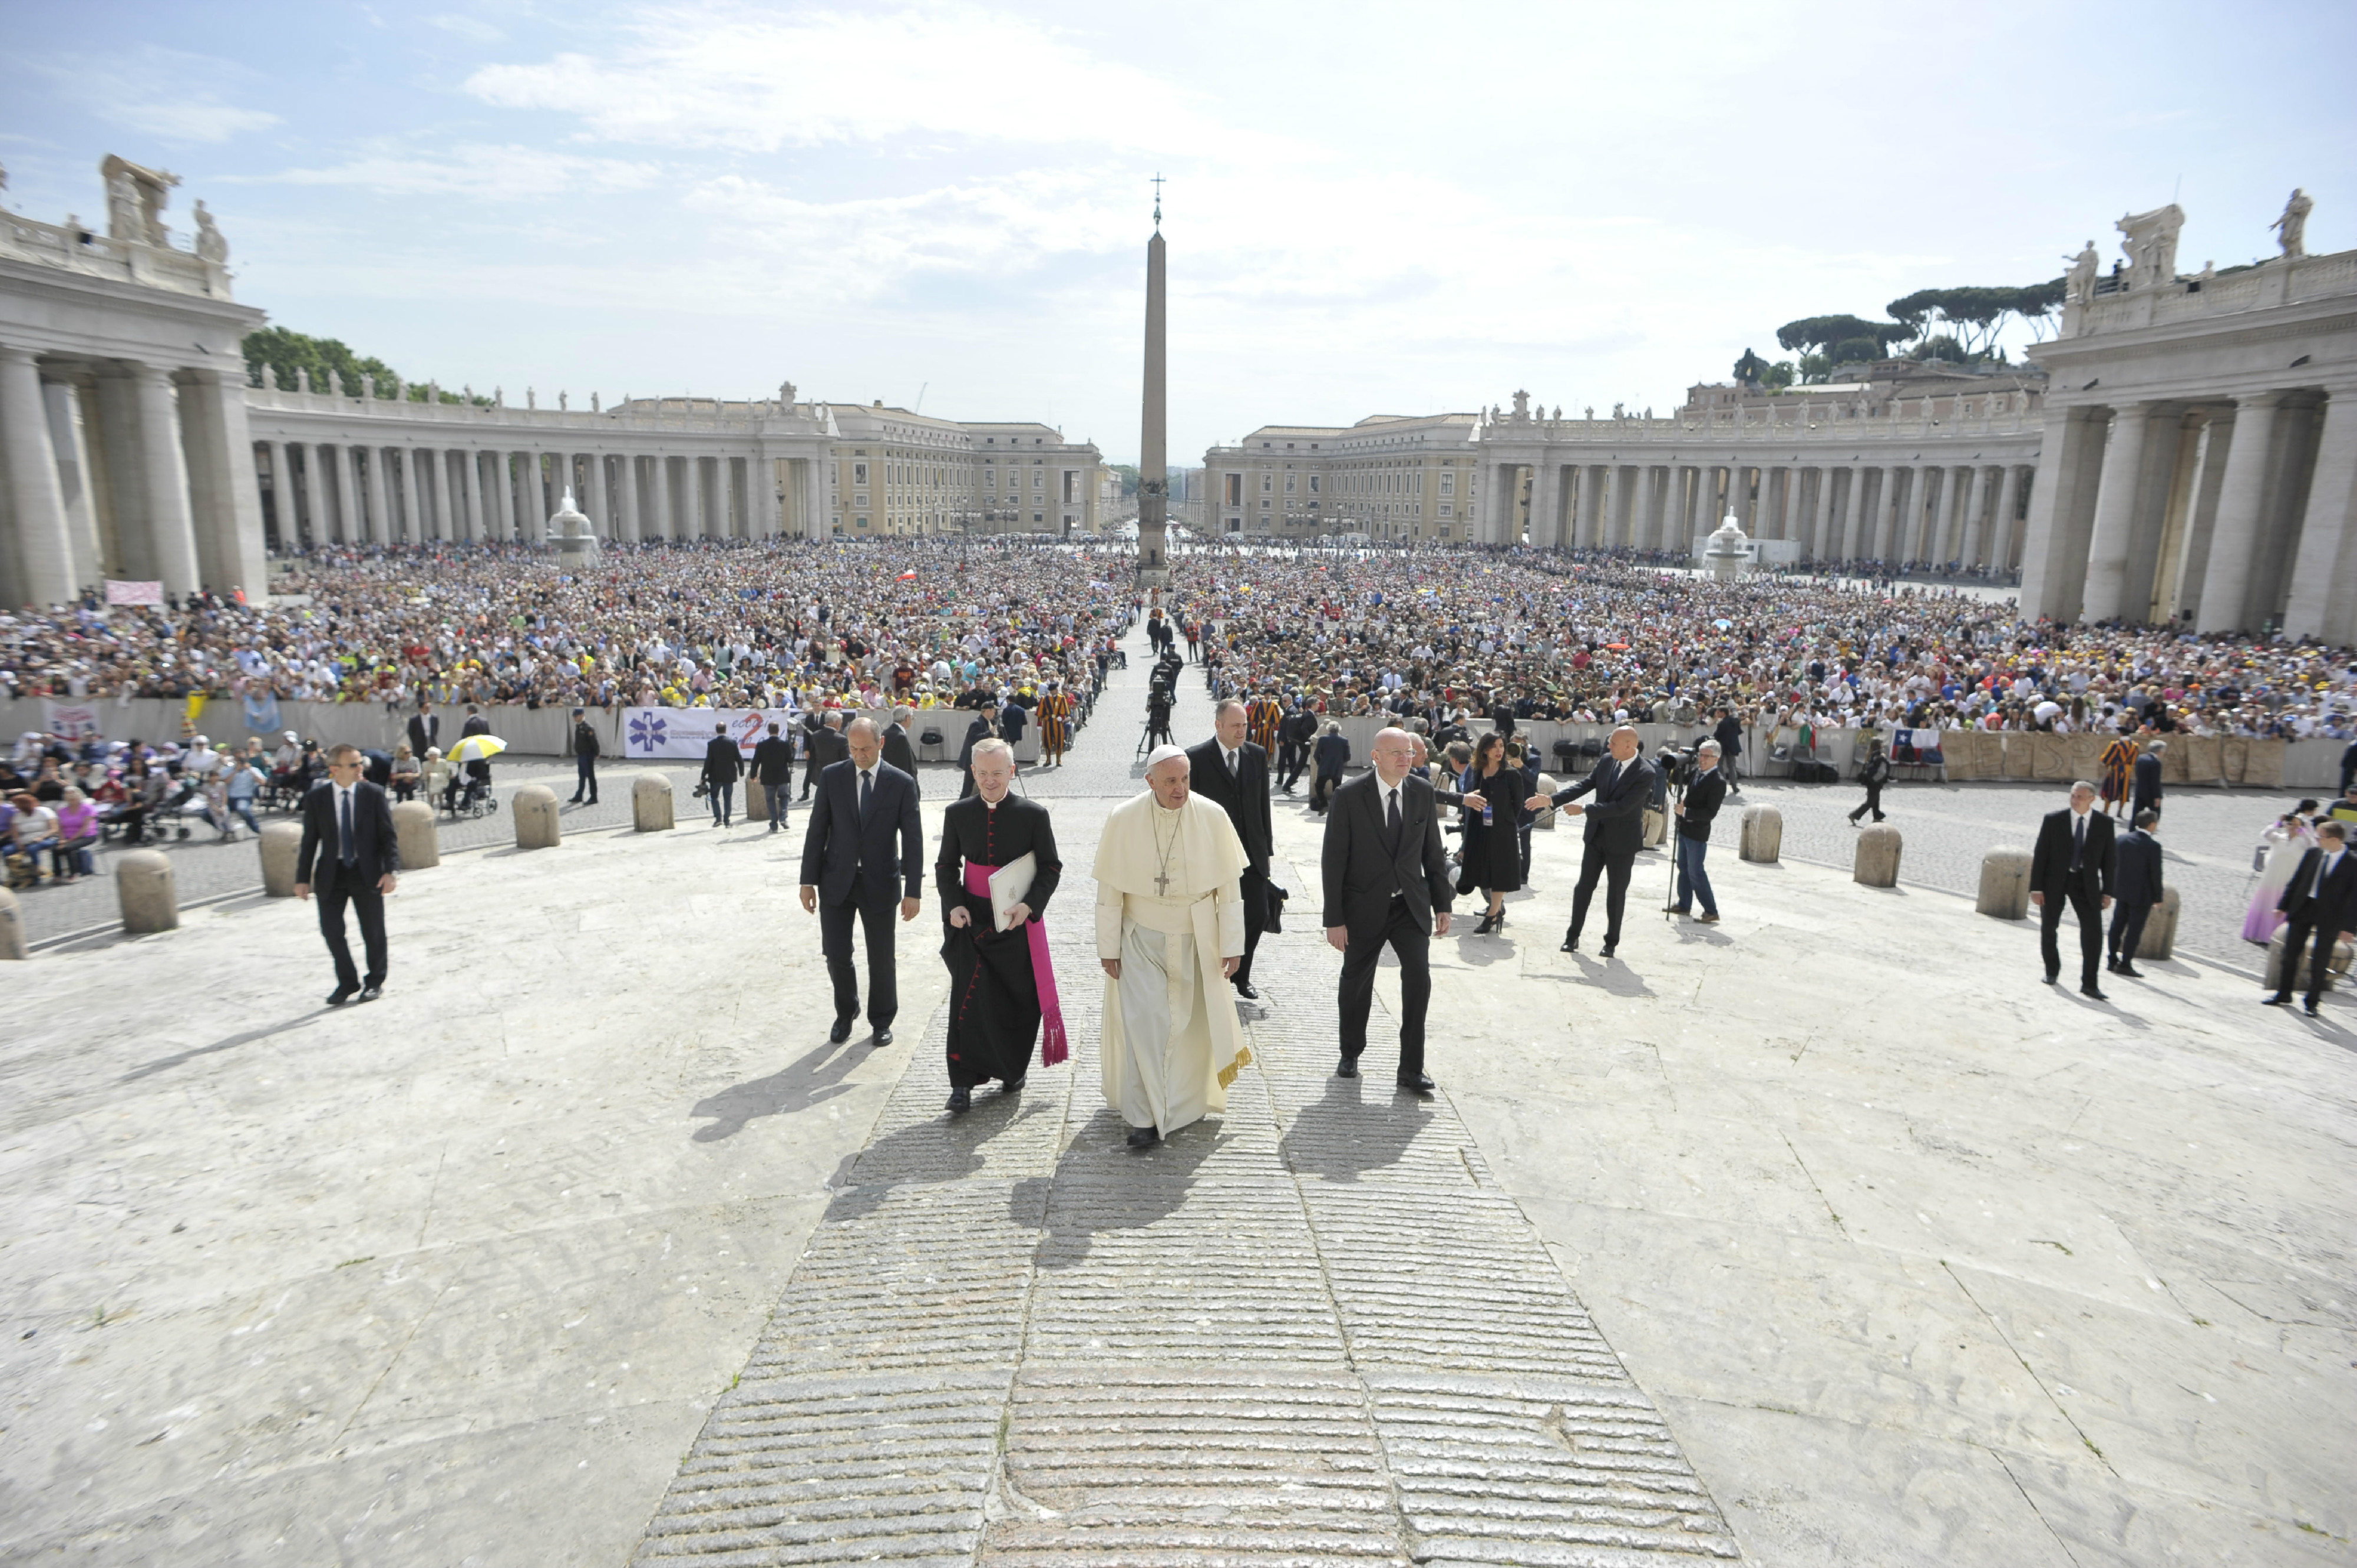 Pope Francis during the General Audience of Wednesday 20th of May 2015